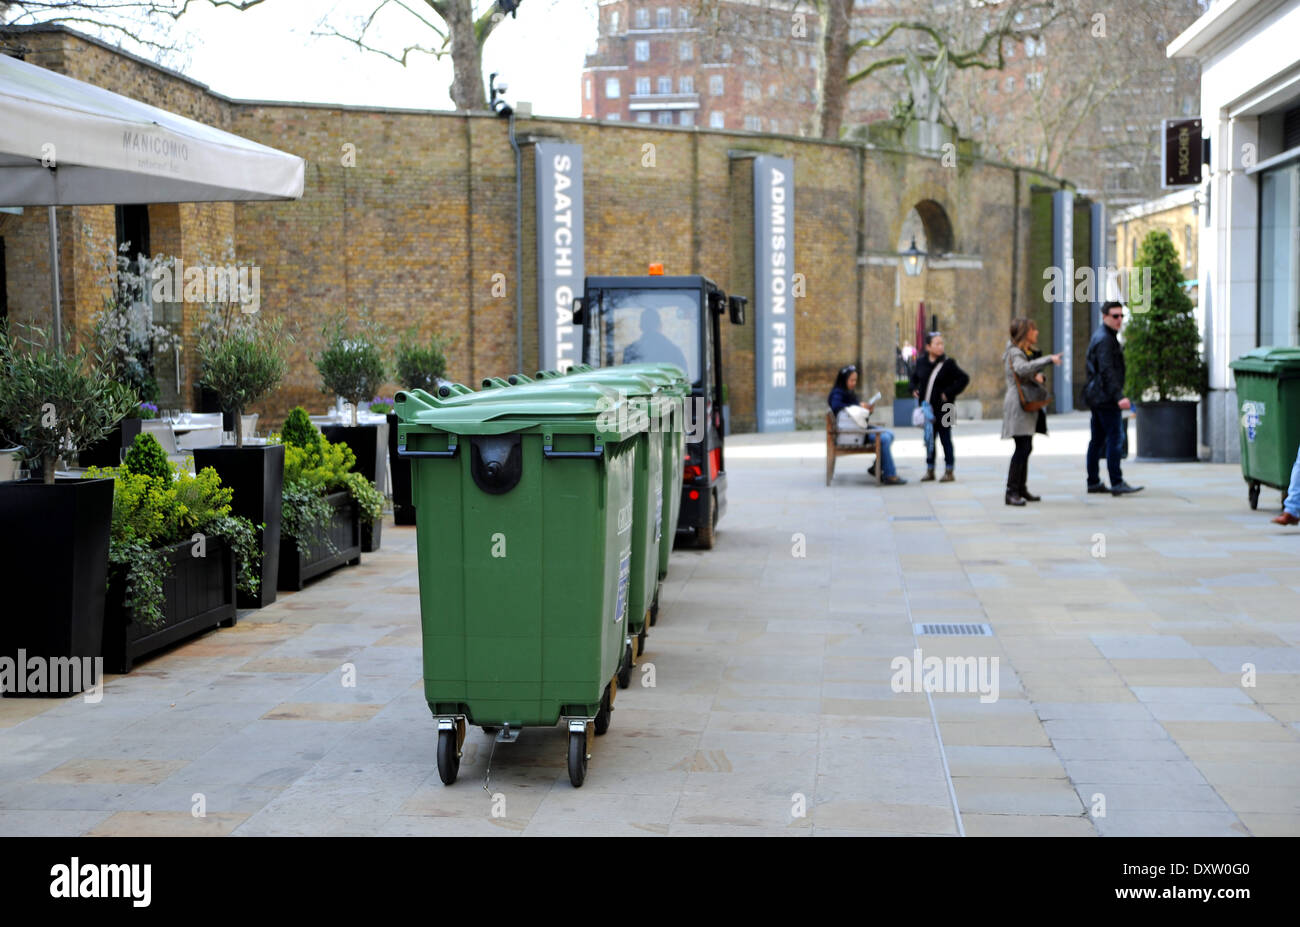 Train of Rubbish bins being pulled along by a cart just off Sloane Square London Stock Photo